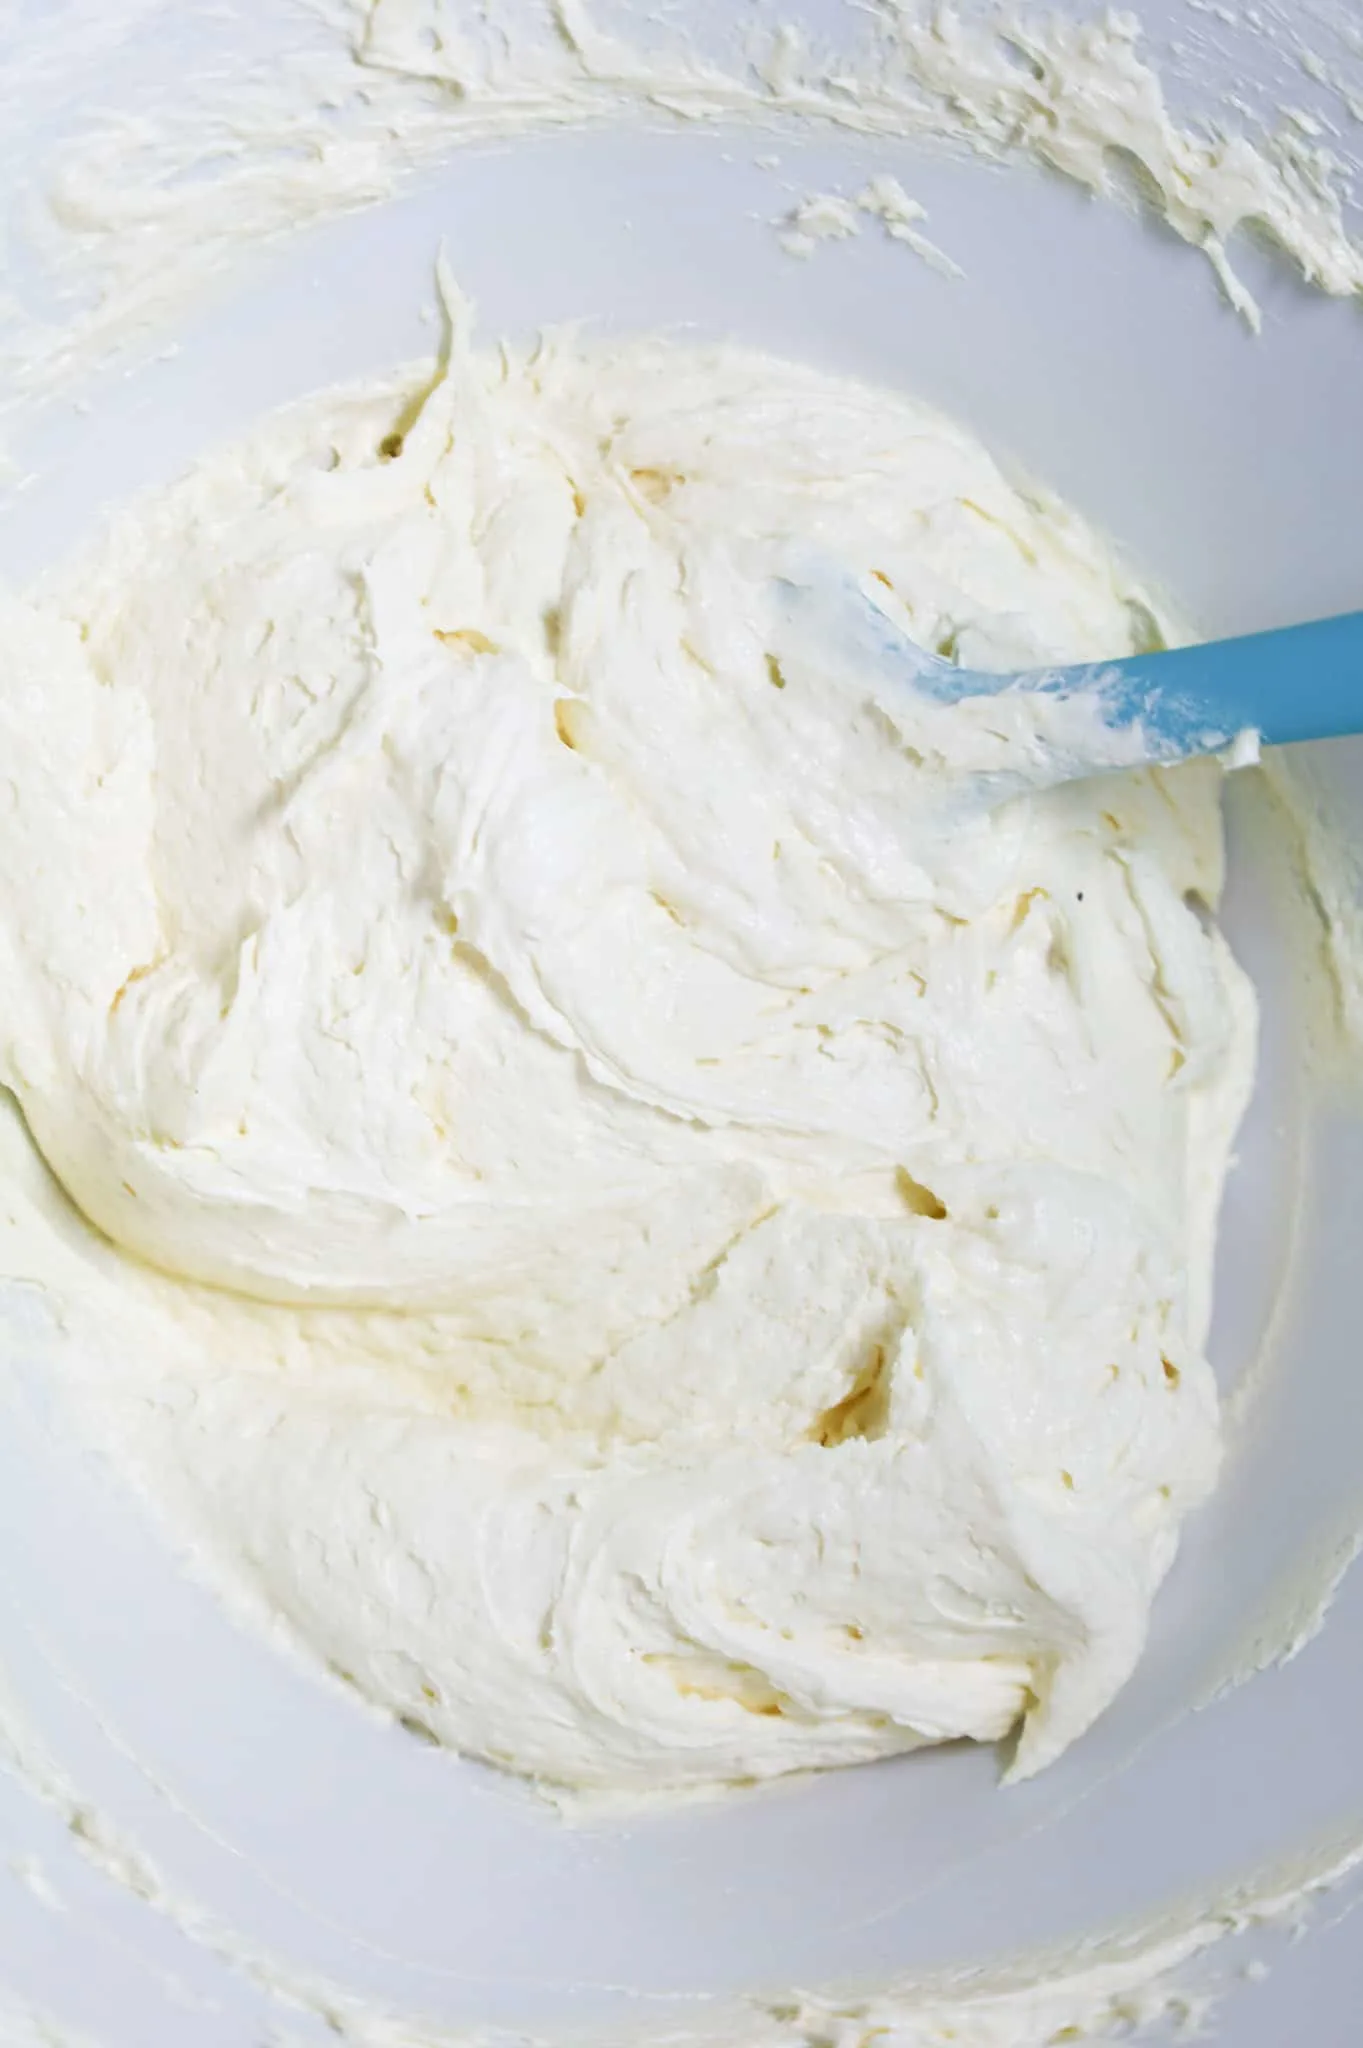 Cool Whip, cream cheese and pudding mix mixture in a mixing bowl